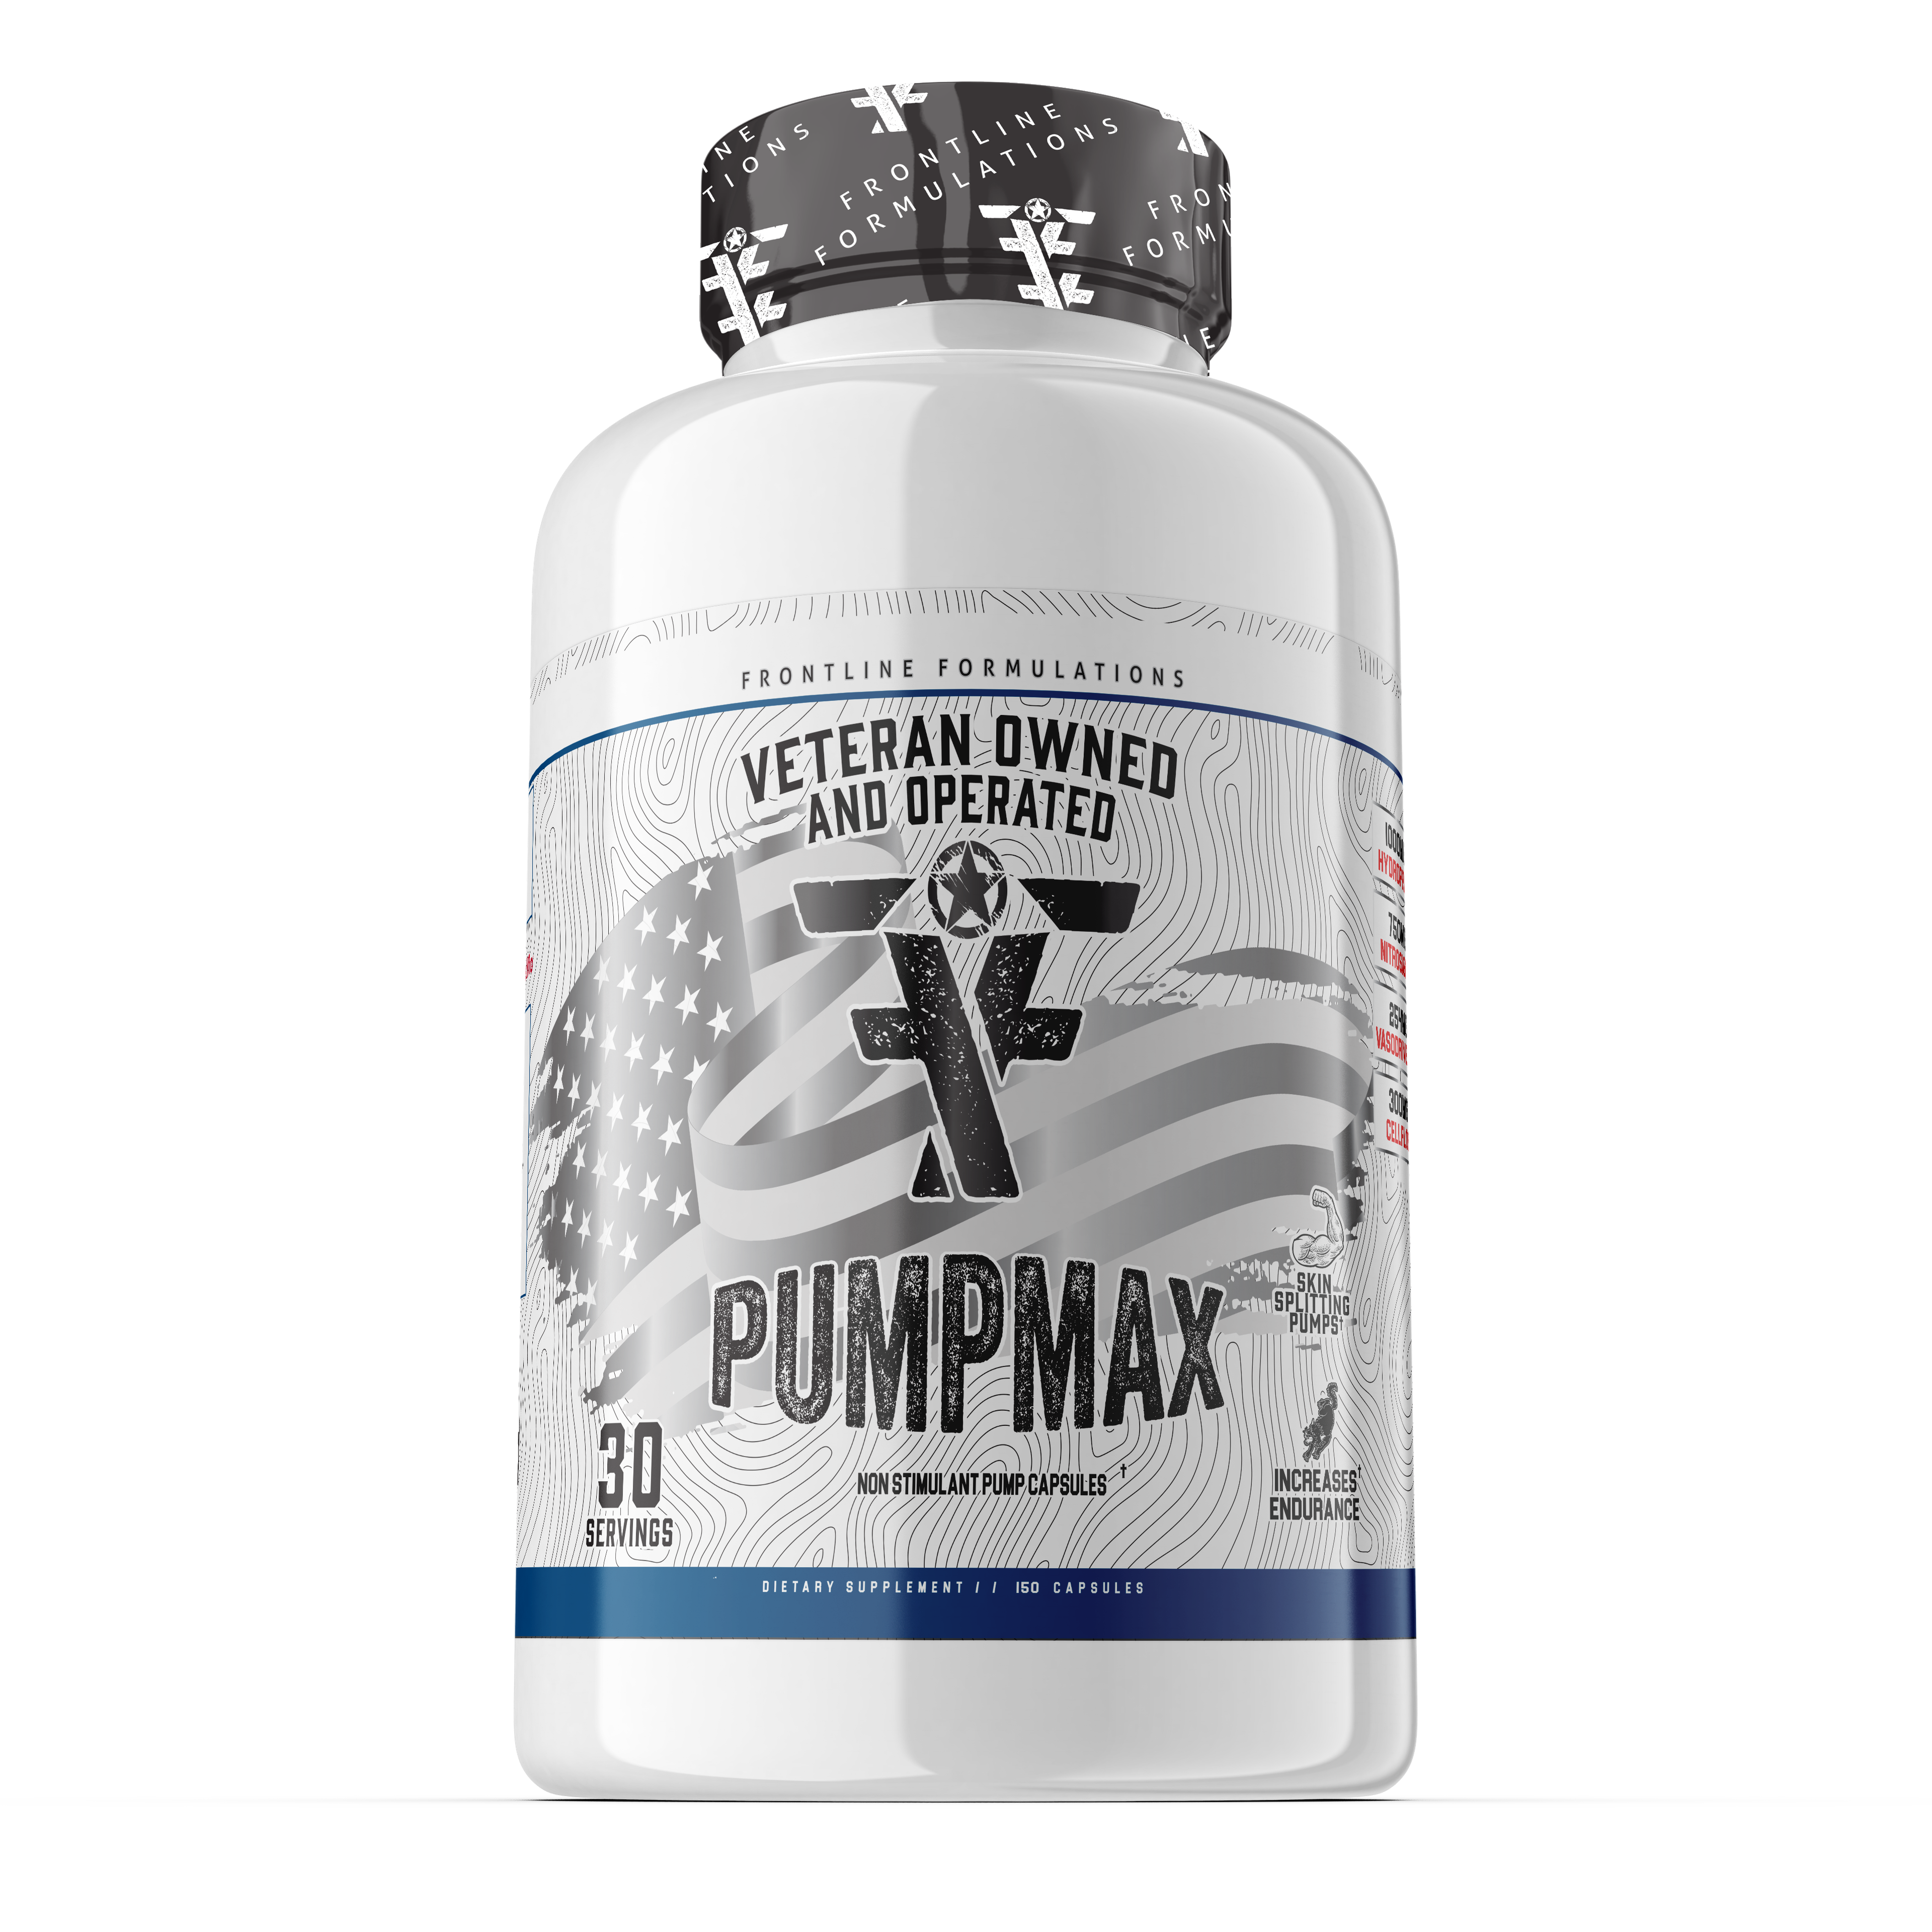 Pump Max Introducing Pump Max: Elevate your workout experience with Pump Max—a premium blend of four trademarked ingredients designed to support blood flow and enhance muscle pumps. Featuring: HydroPrime: Supports athletic performance and hydration, aidin